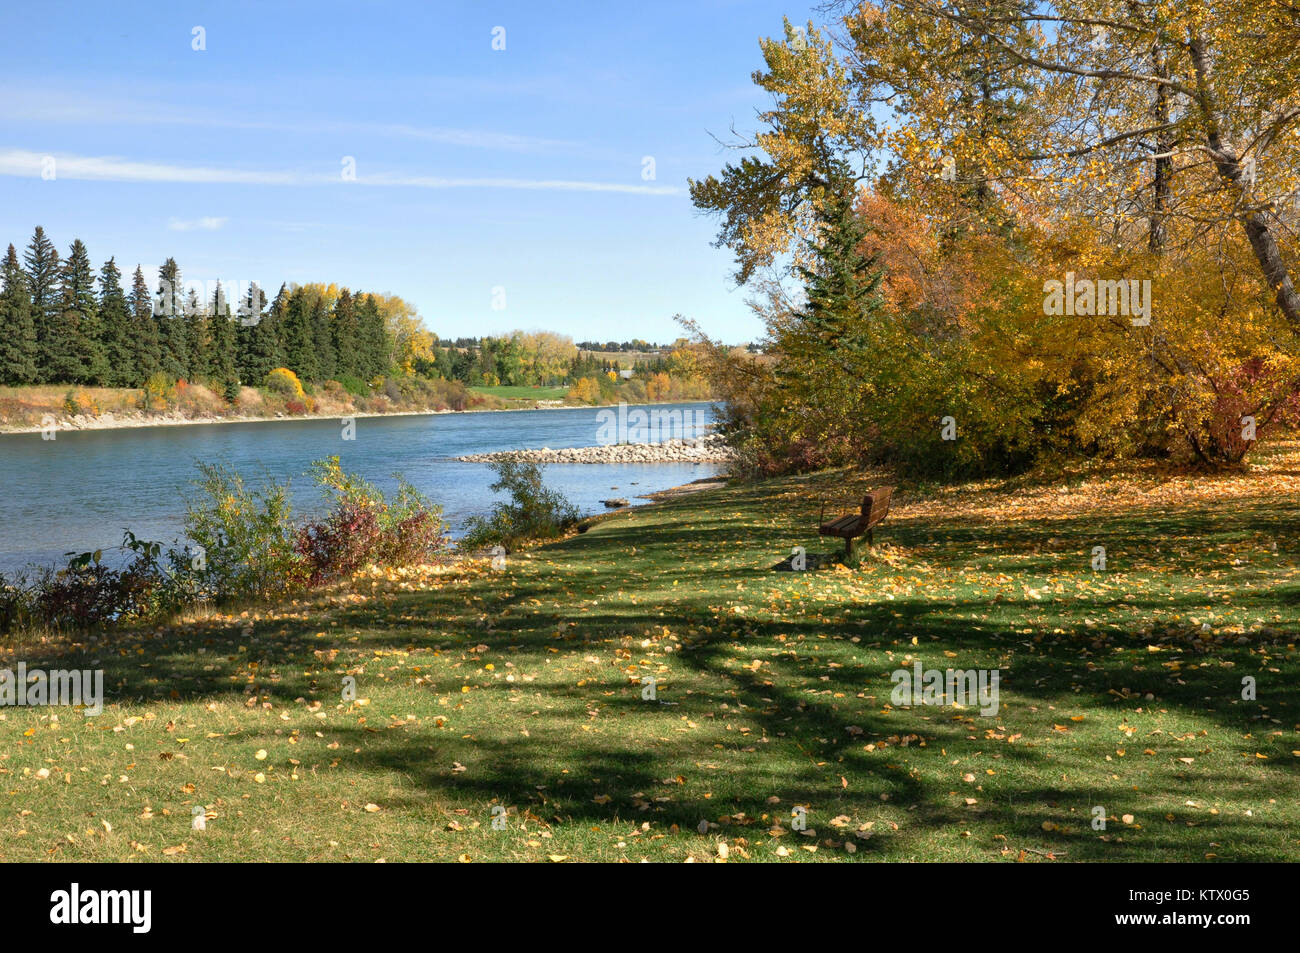 Fall Landscapes by the Bow River, Bowness Park, Calgary, Alberta, Canada. Stock Photo